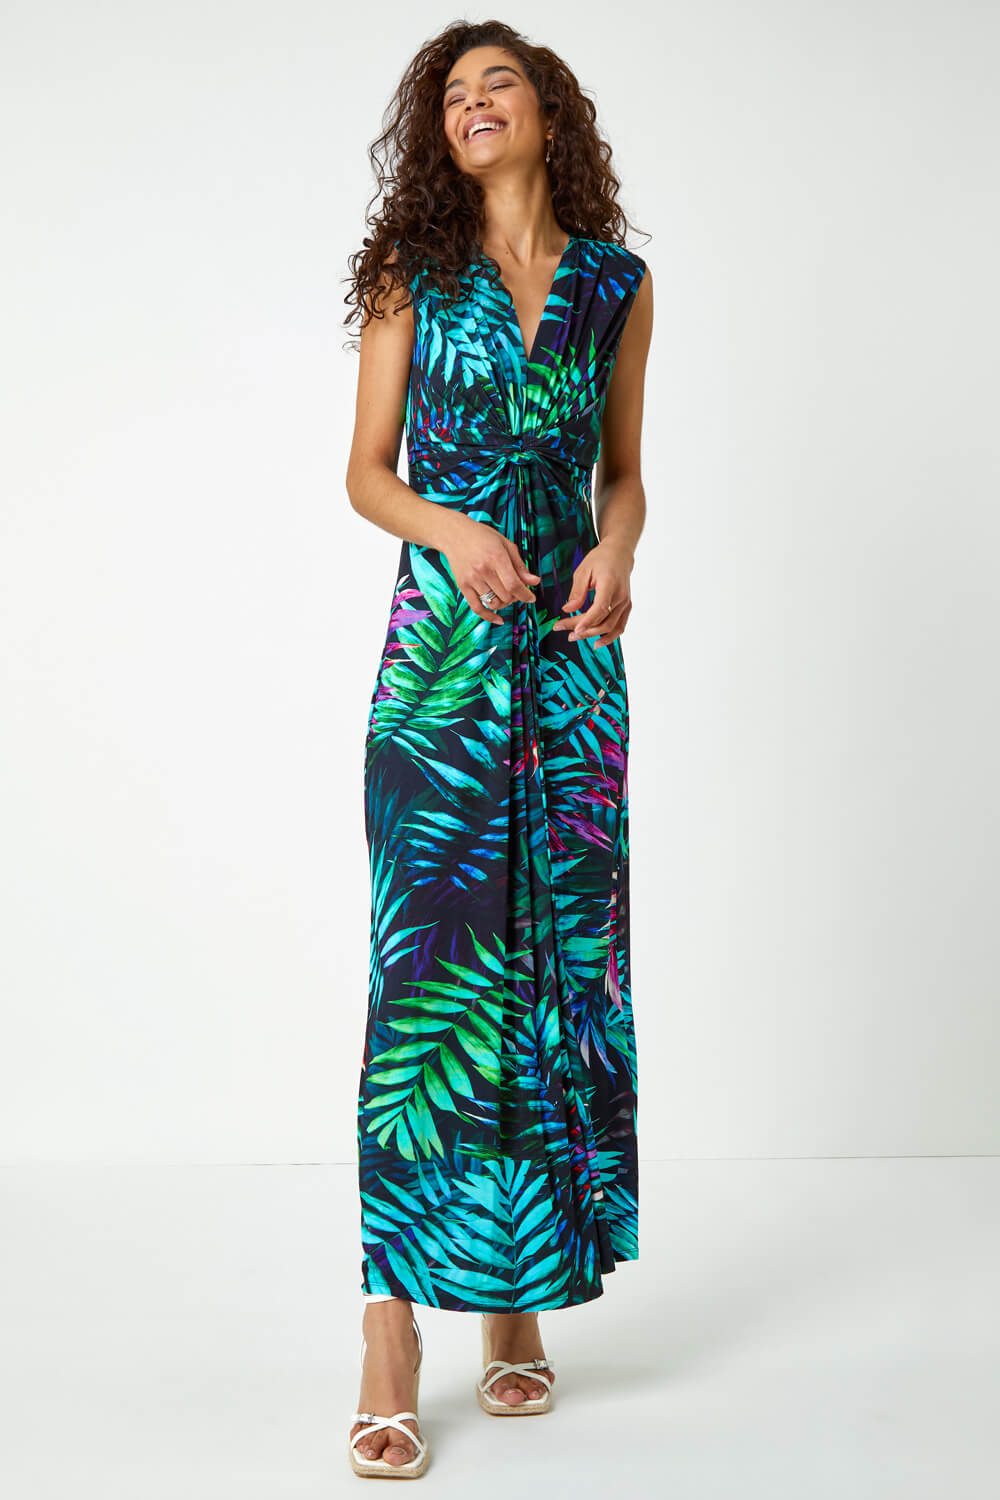 Turquoise Tropical Print Maxi Dress, Image 2 of 6